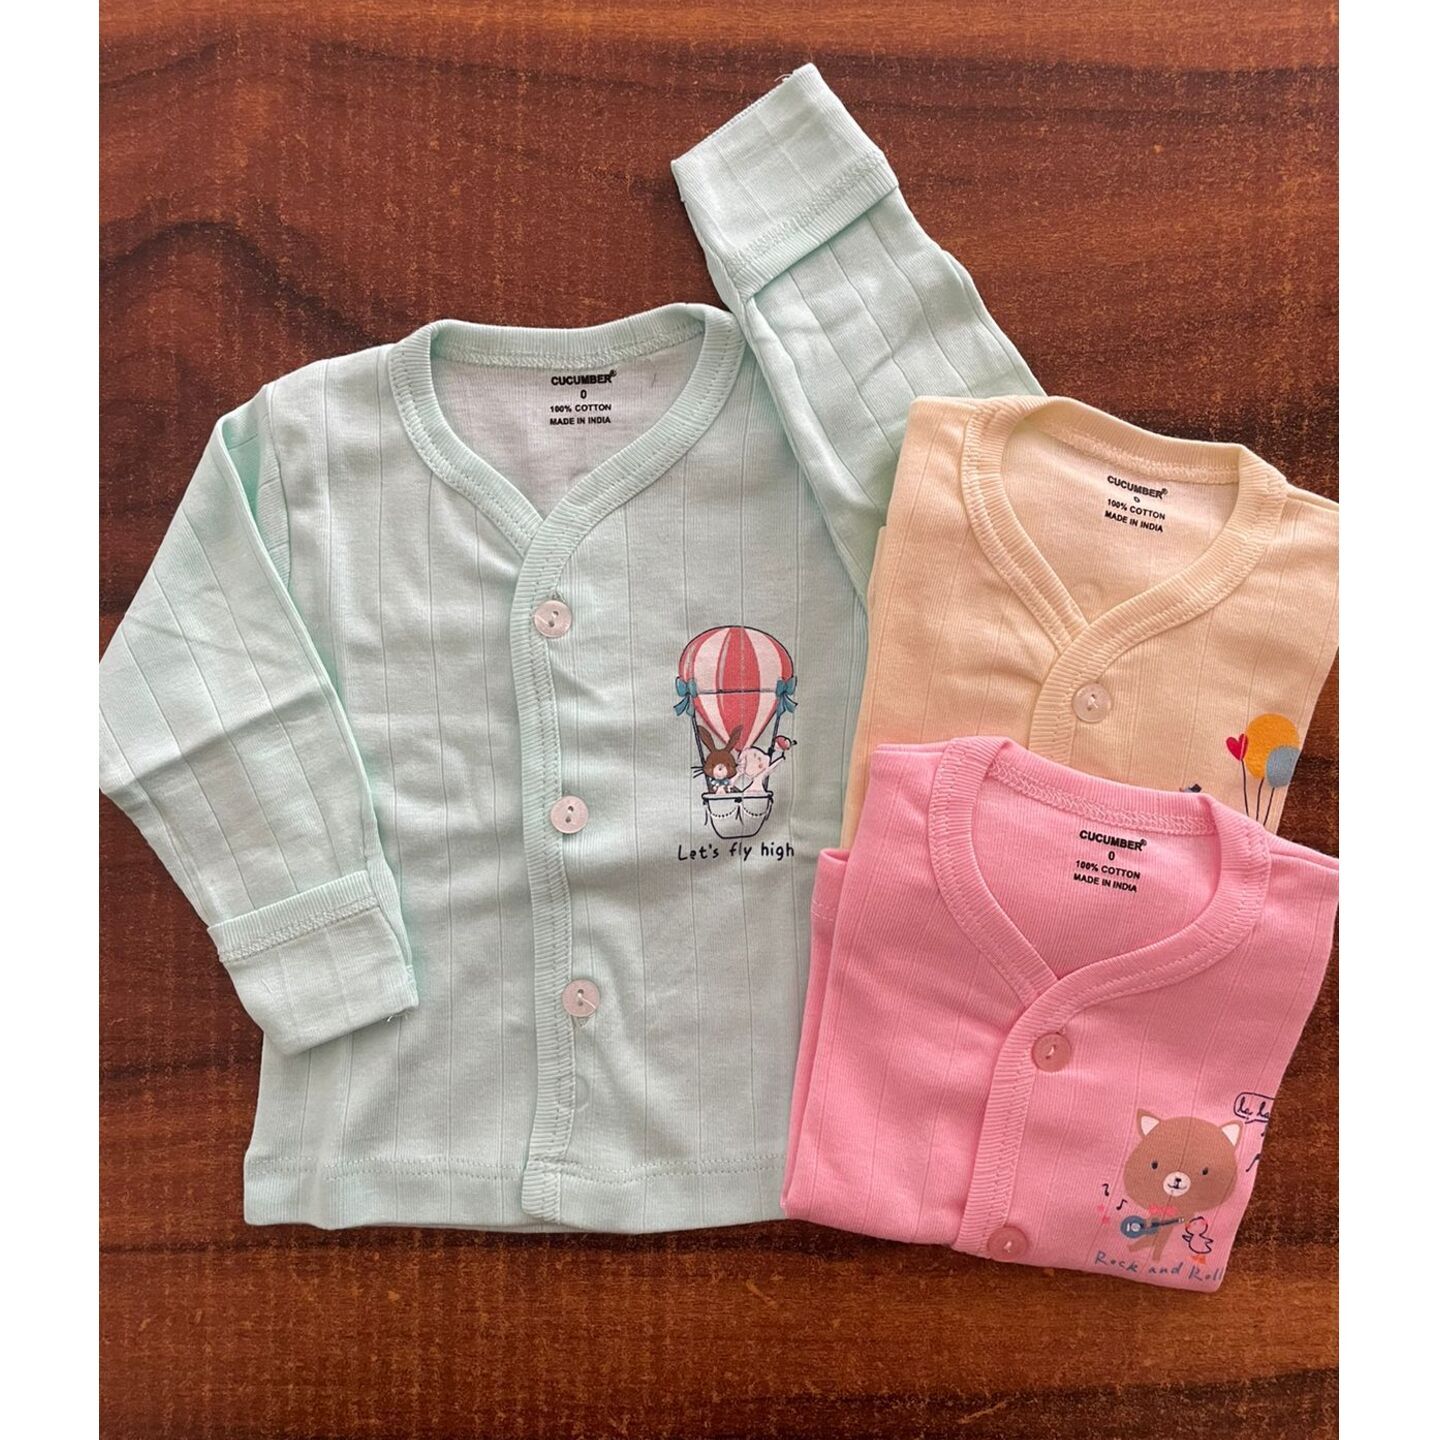 Cucumber Newborn Infant Baby Full Sleeves Top Set Pack of 3 Rs 360